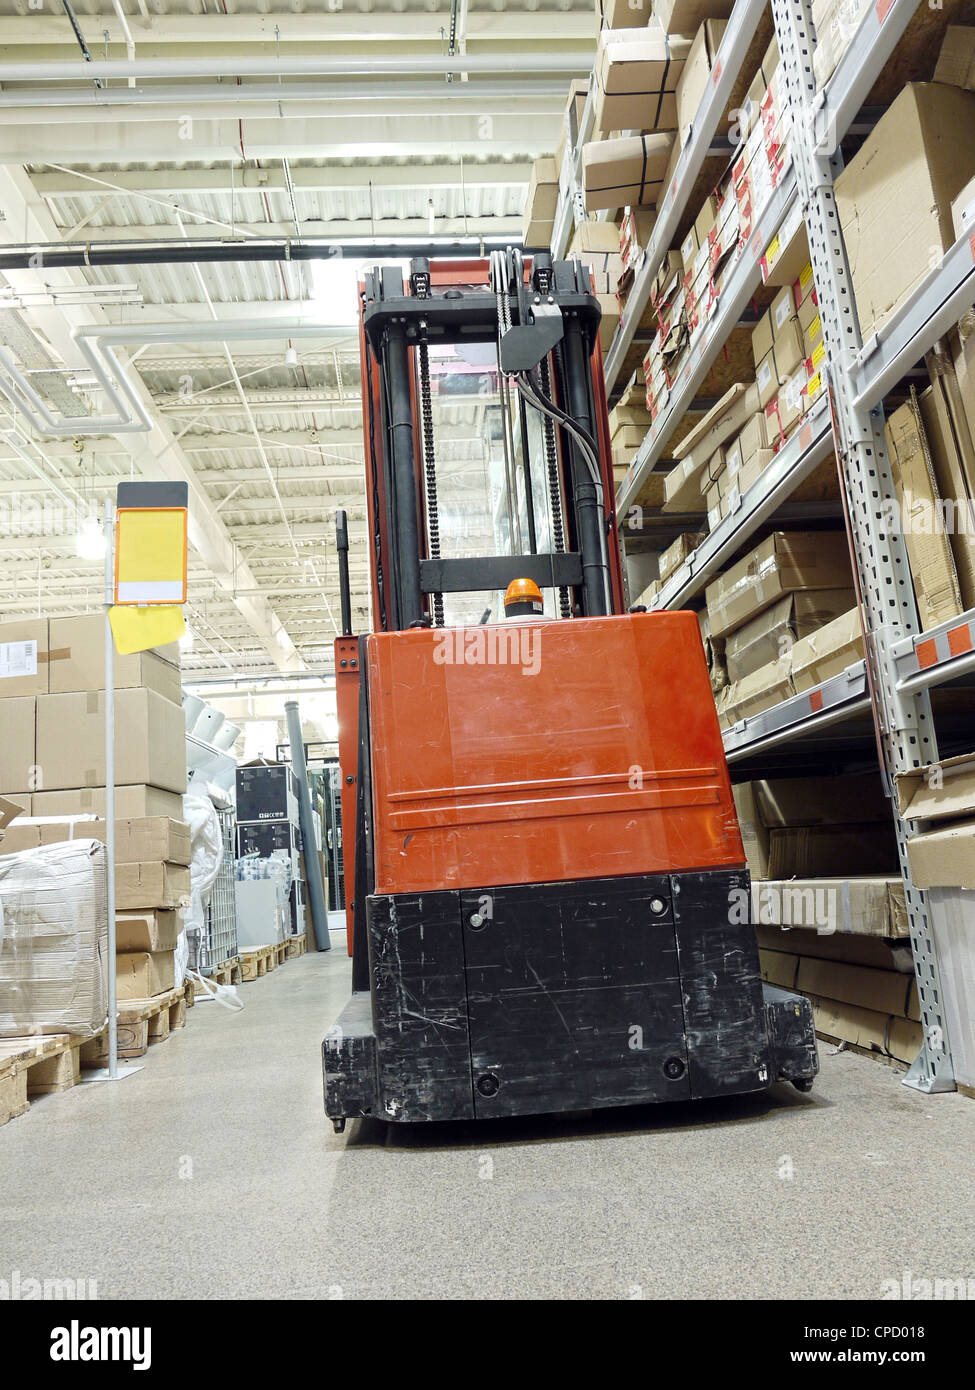 Warehouse aisle with parked forklift truck Stock Photo